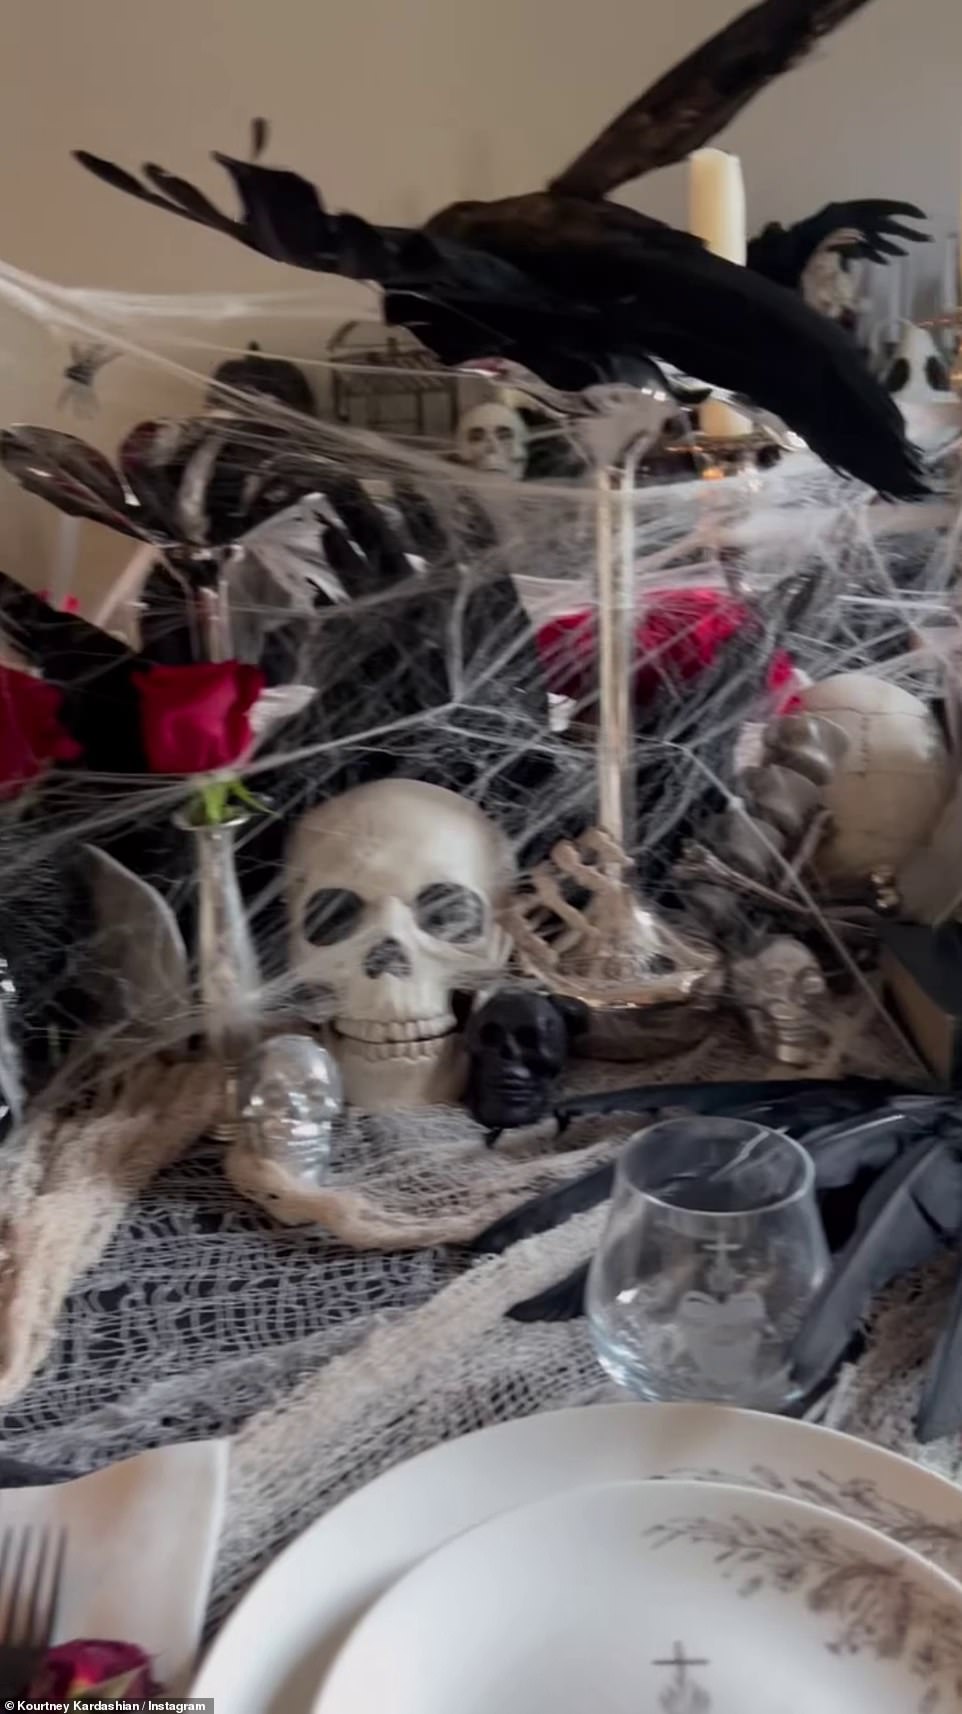 The star, who is pregnant, had a table already set up with skulls